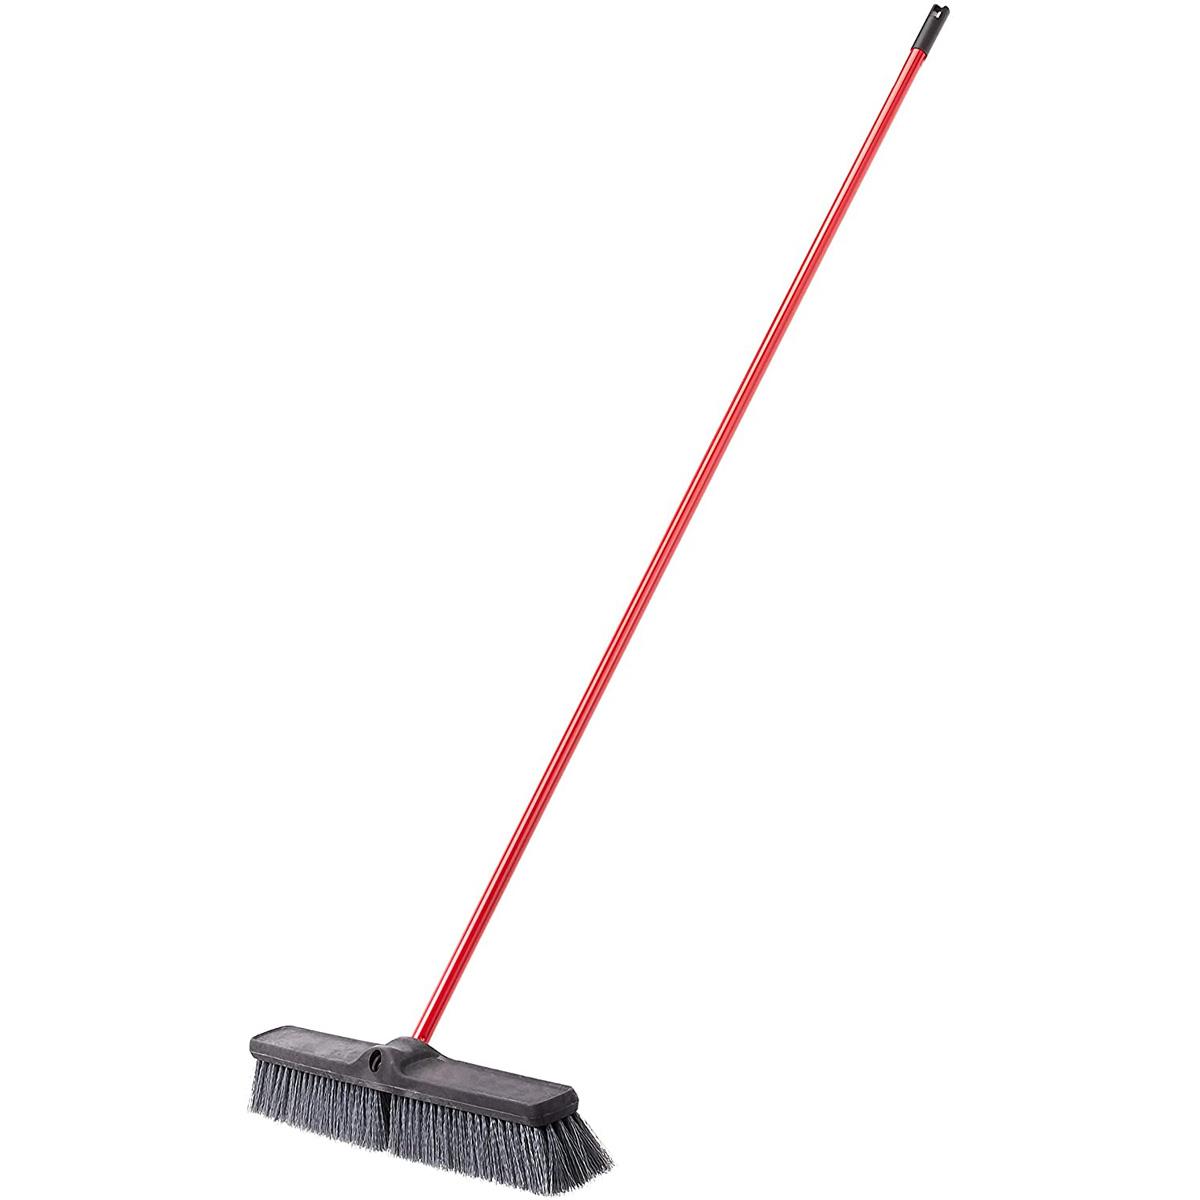 6x AmazonCommercial 24in Broom Head Push Broom for $24.99 Shipped